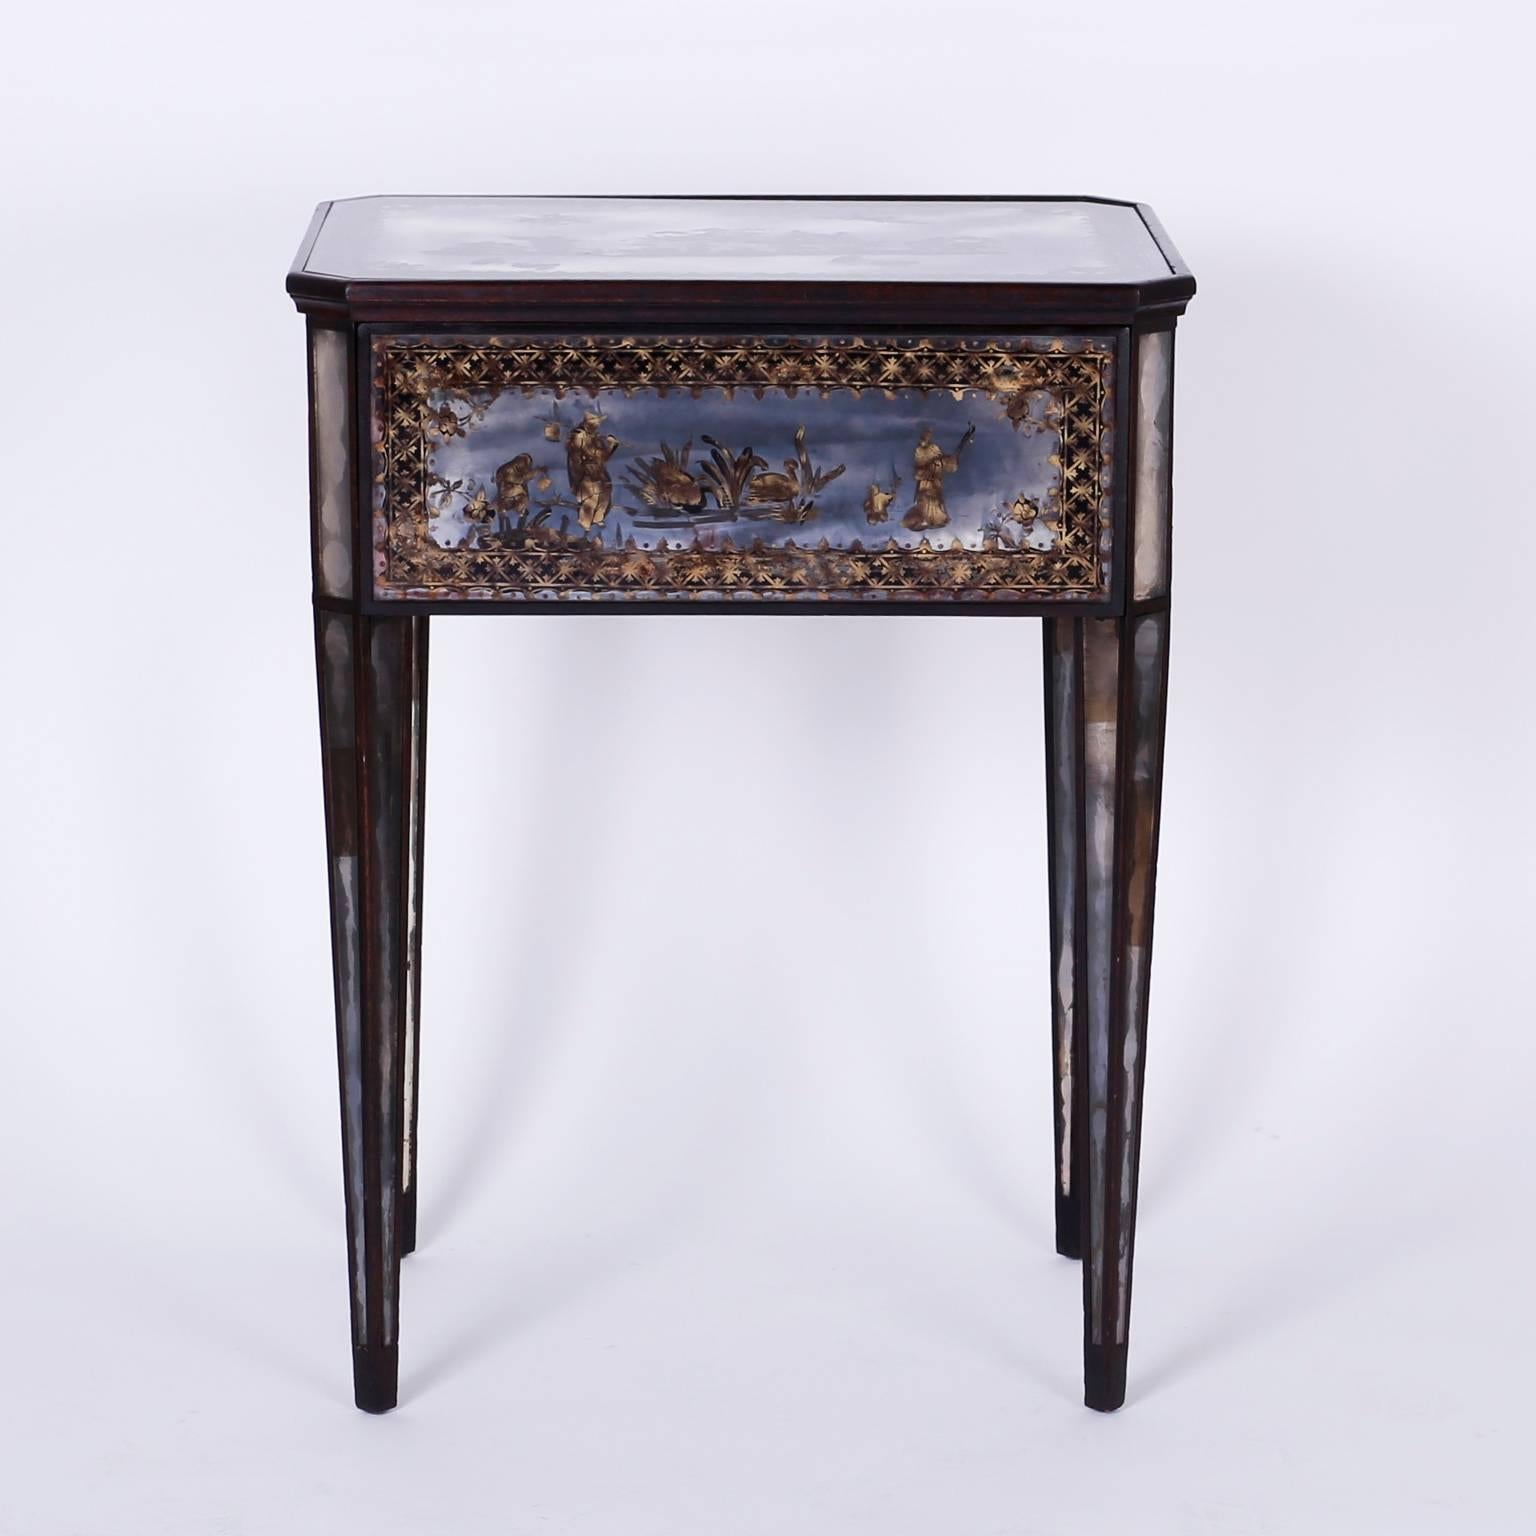 20th Century Pair of Italian Mirrored Nightstands or End Tables with a Chinoiserie Motif